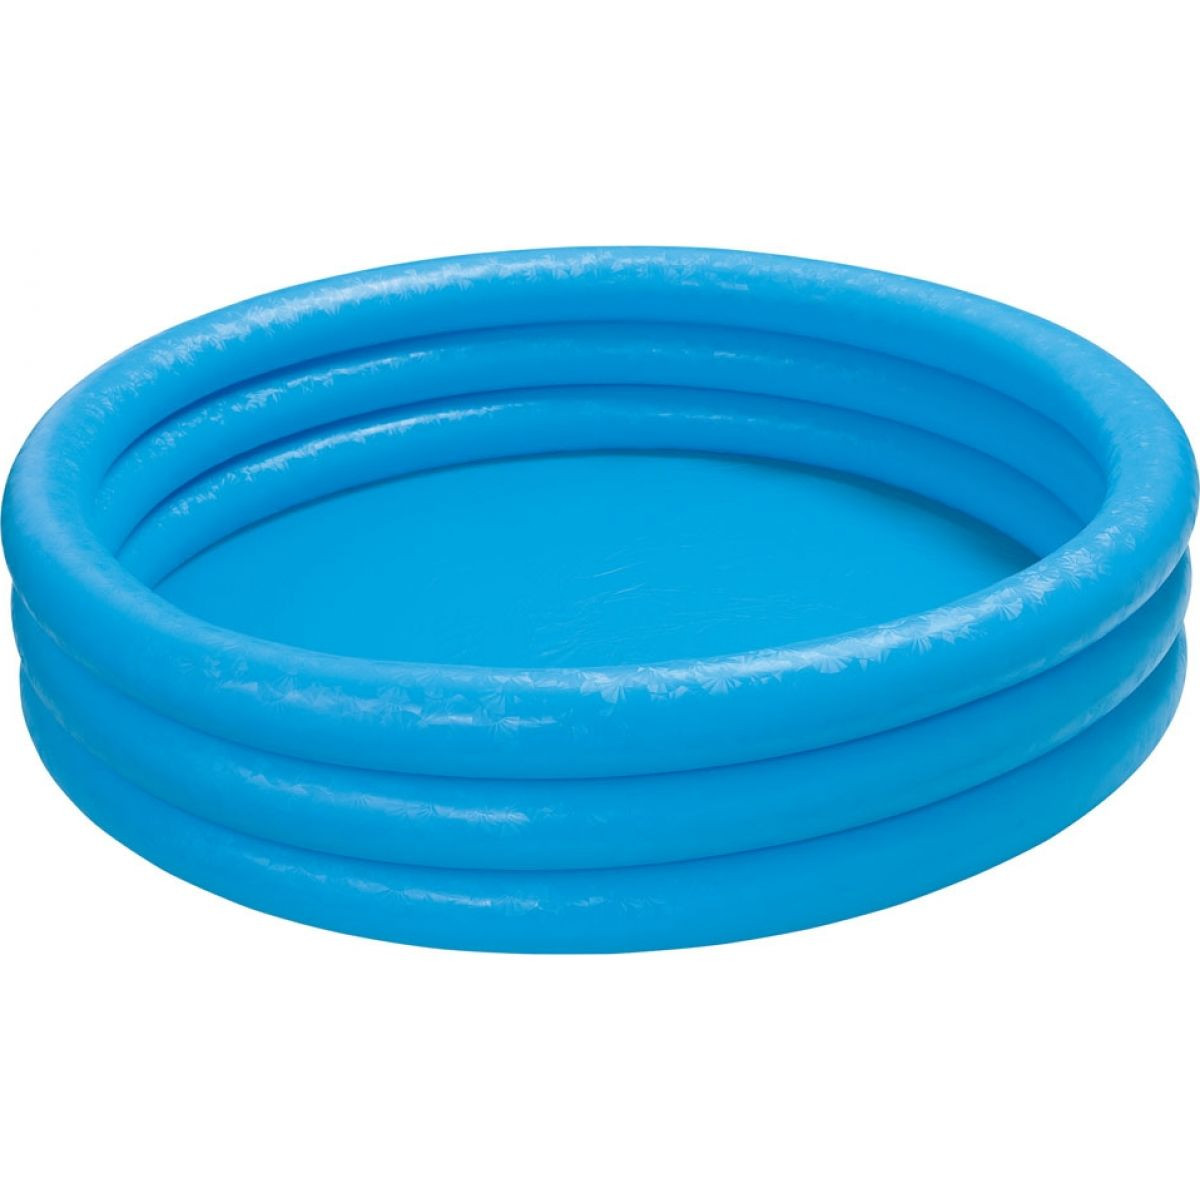 the inflatable pool blue, 147 x 33 cm